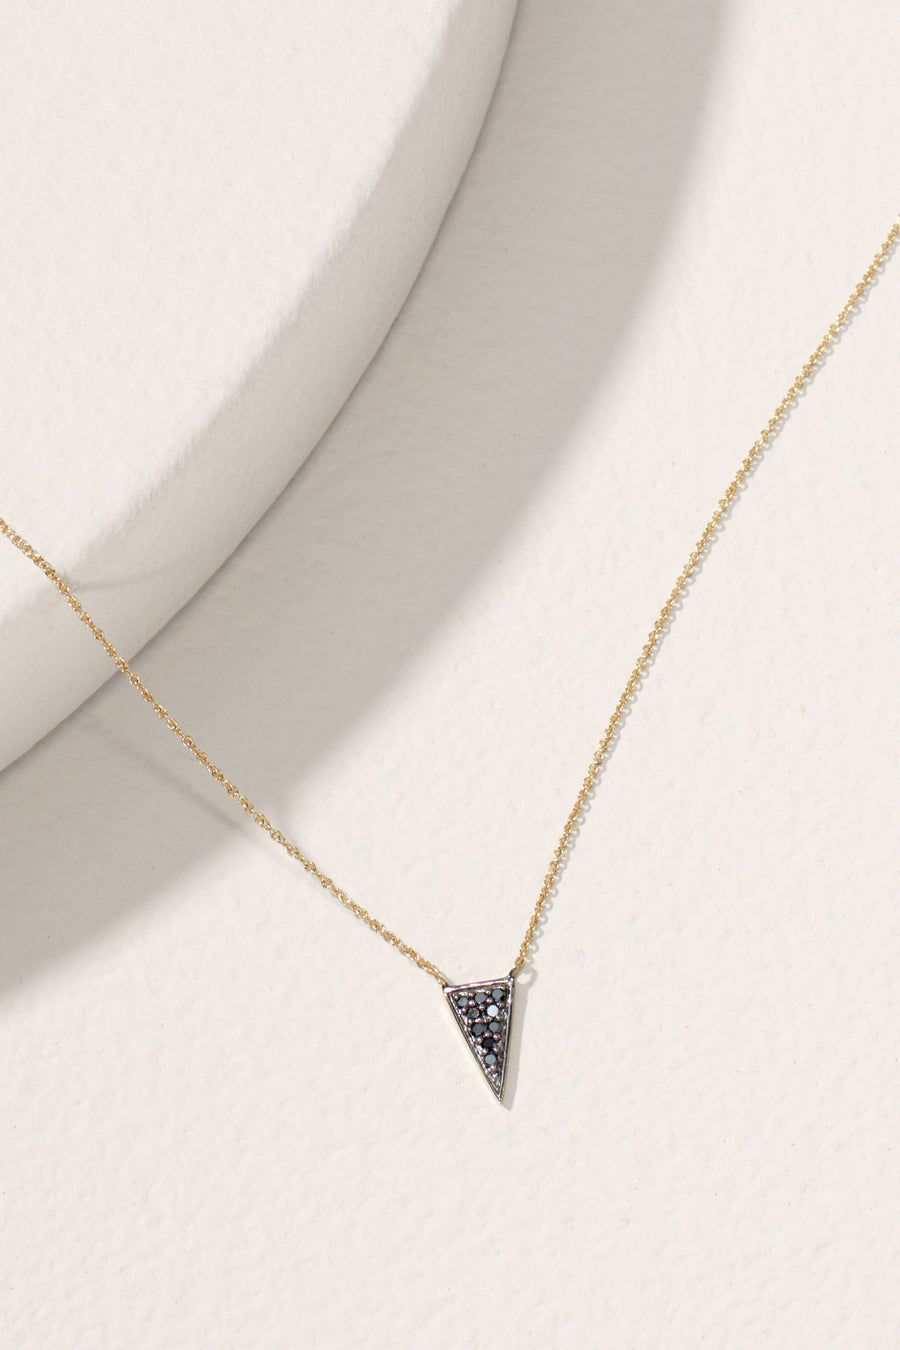 Covet 14kt  Gold and Black Diamond Renegade Necklace